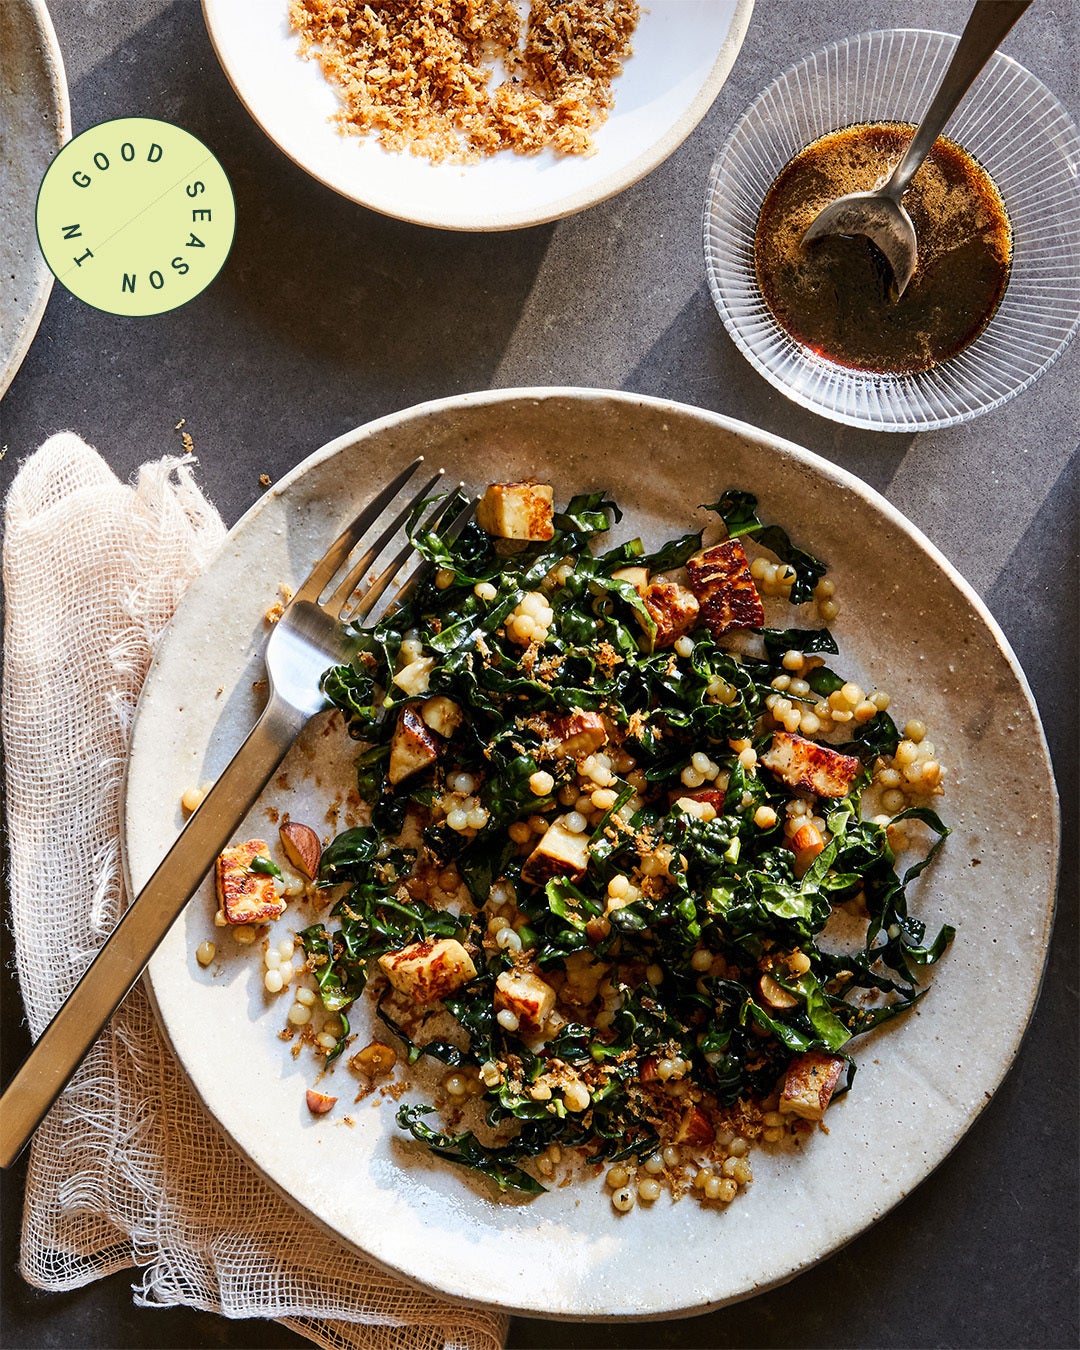 Kale and couscous recipes